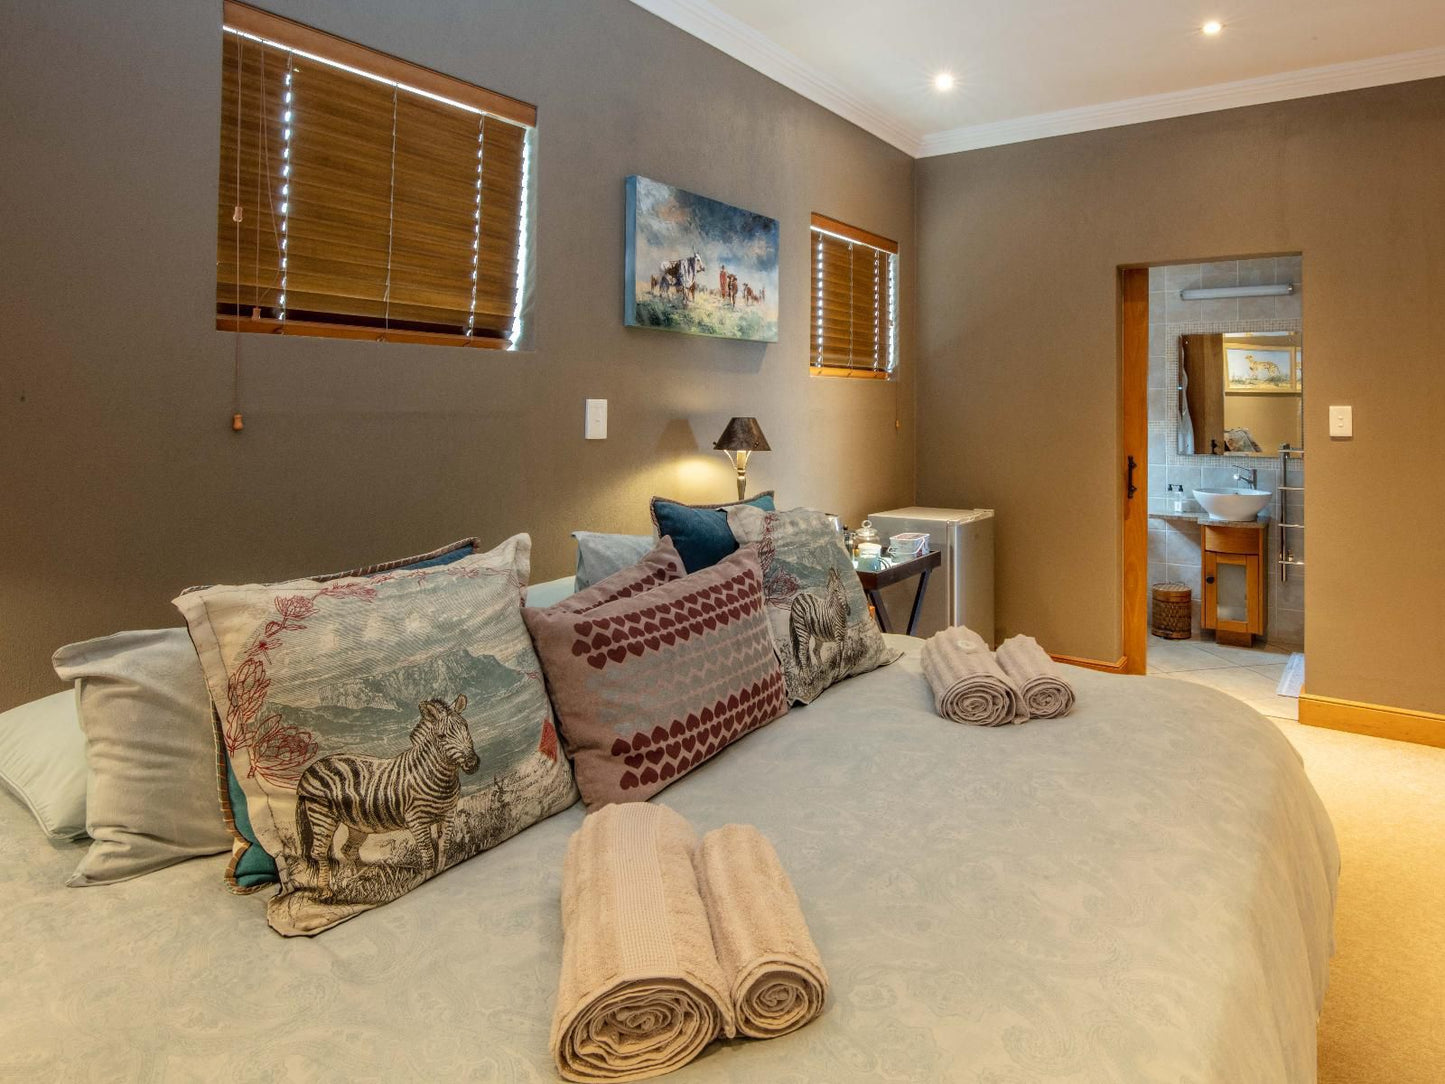 Two Sunsets Bandb Outeniqua Strand Great Brak River Western Cape South Africa Bedroom